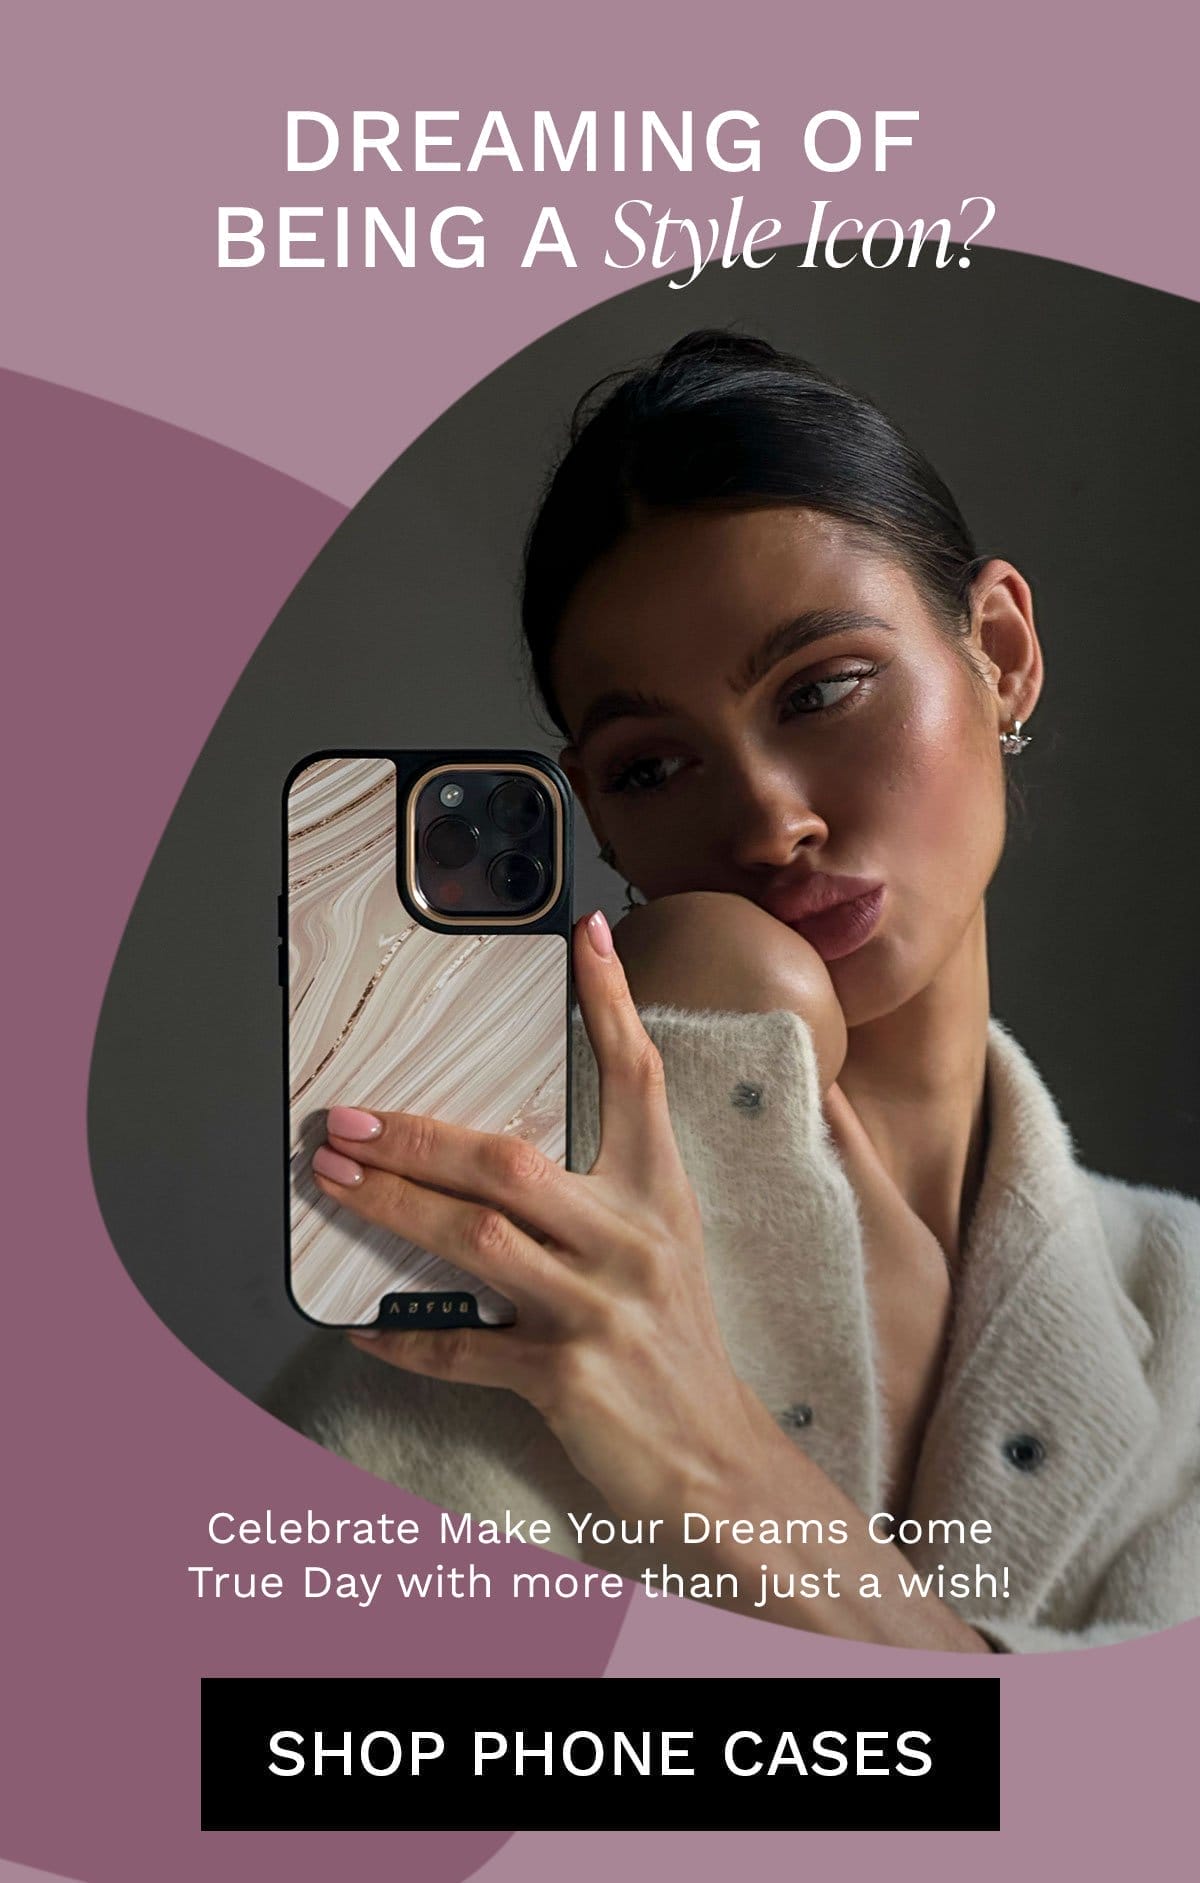 Dreaming of Being a Style Icon? Celebrate Make Your Dreams Come True Day with more than just a wish! Elevate your style and turn your phone into a fashion statement with our stunning phone case collections. [SHOP PHONE CASES] And if choosing just one seems impossible, dive into our BUY4PAY2 phone cases offer — pick any four of your favorite designs, but only pay for two. ✅ 200+ unique designs to choose from ✅ Shock absorption ✅ Raised bezel for screen & camera protection ✅ Seamless clickable buttons ✅ All ports accessible ✅ Fade-resistant prints